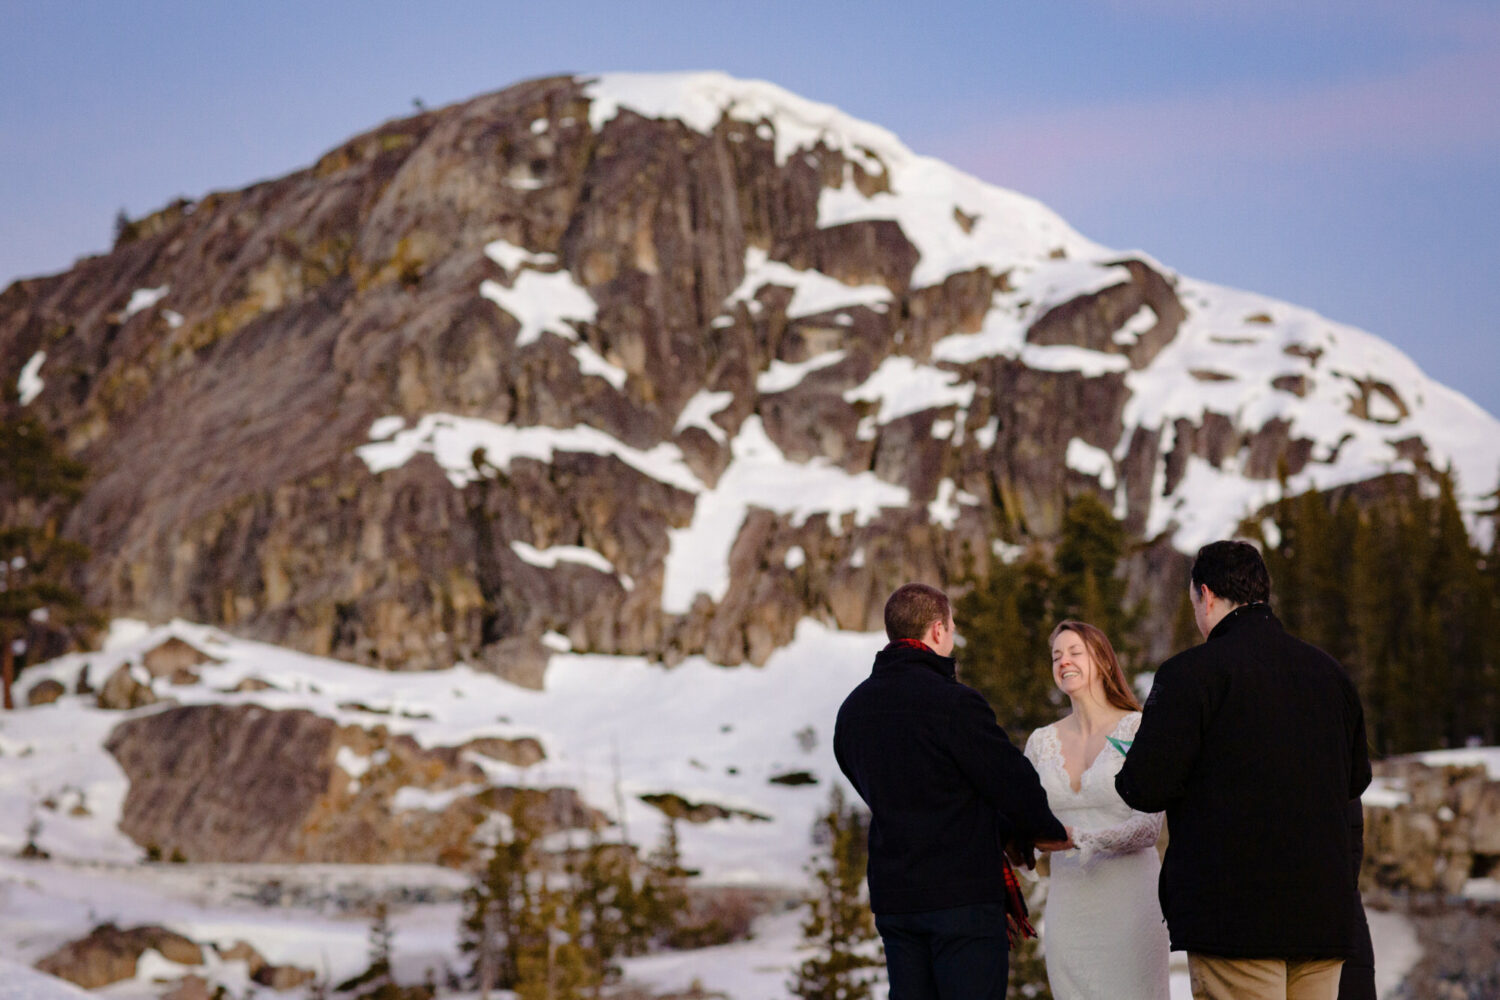 A couple that decided to have an intimate elopement on Donner Summit exchanges vows with mountains in the background.